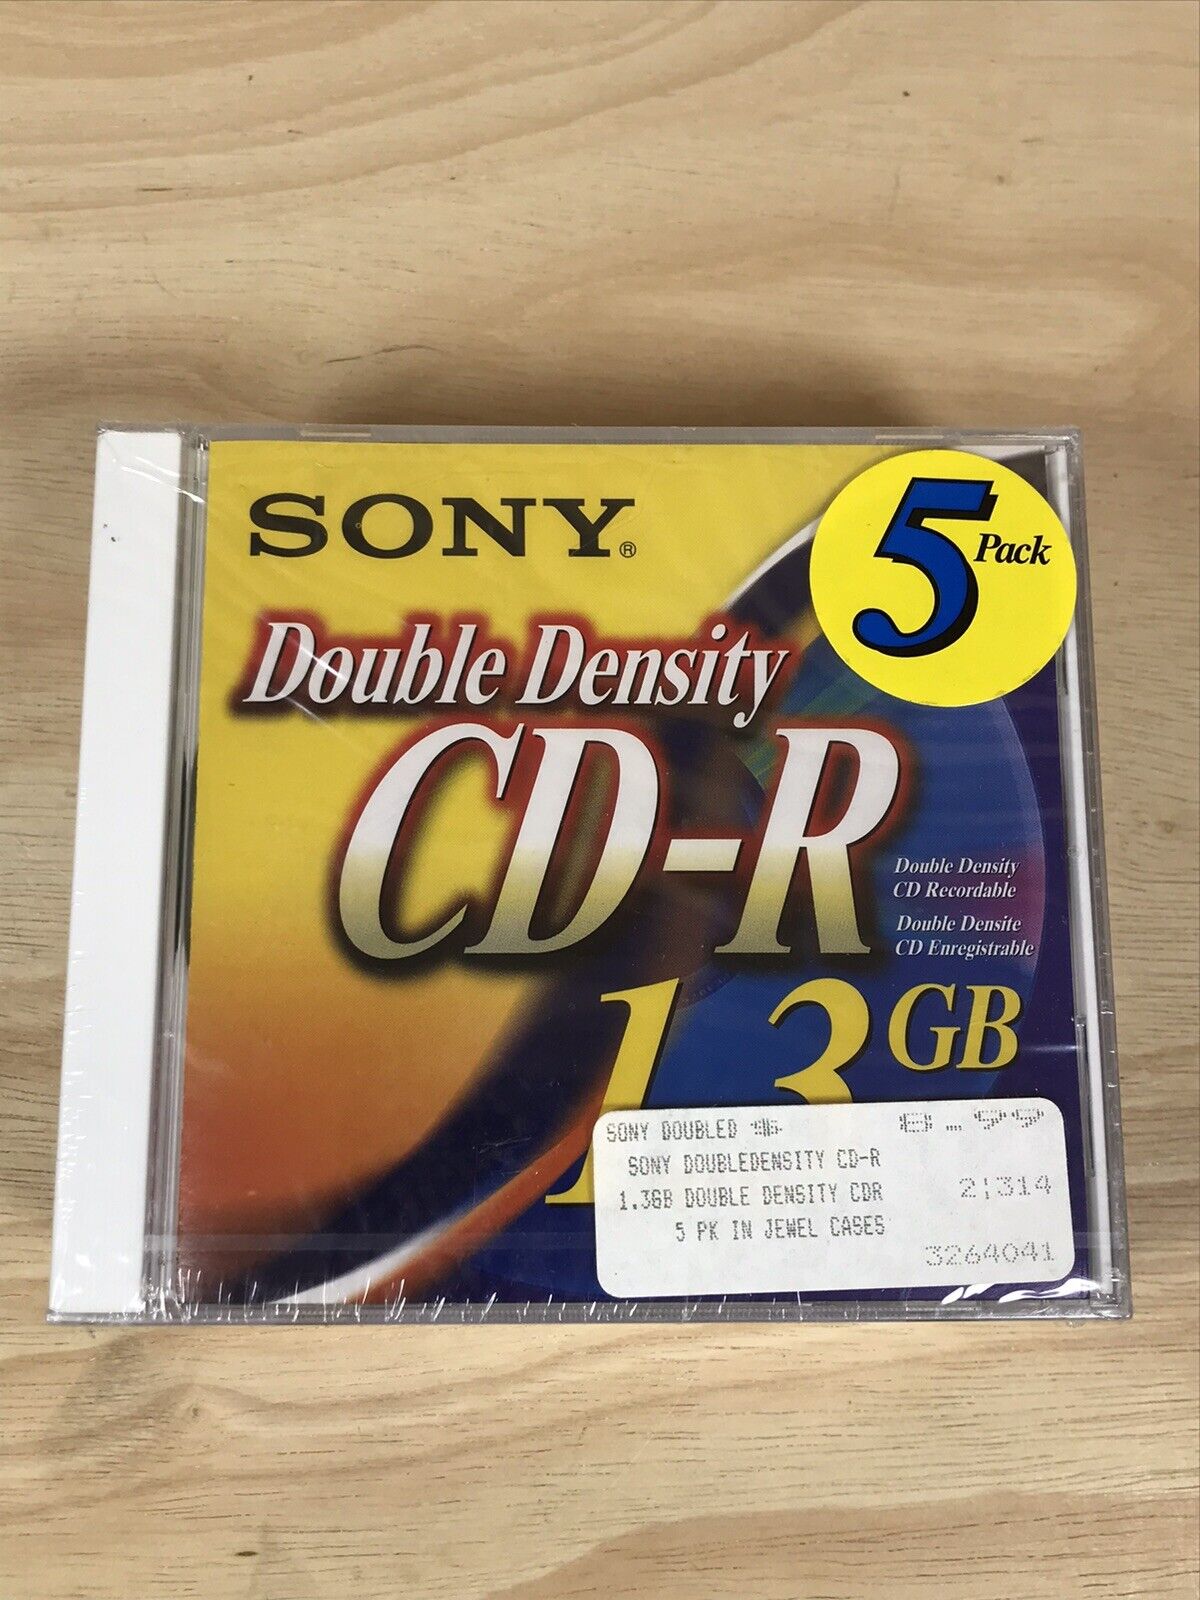 5-pack Sony Double Density CD-R 1.3GB DDCD-R New Factory Sealed